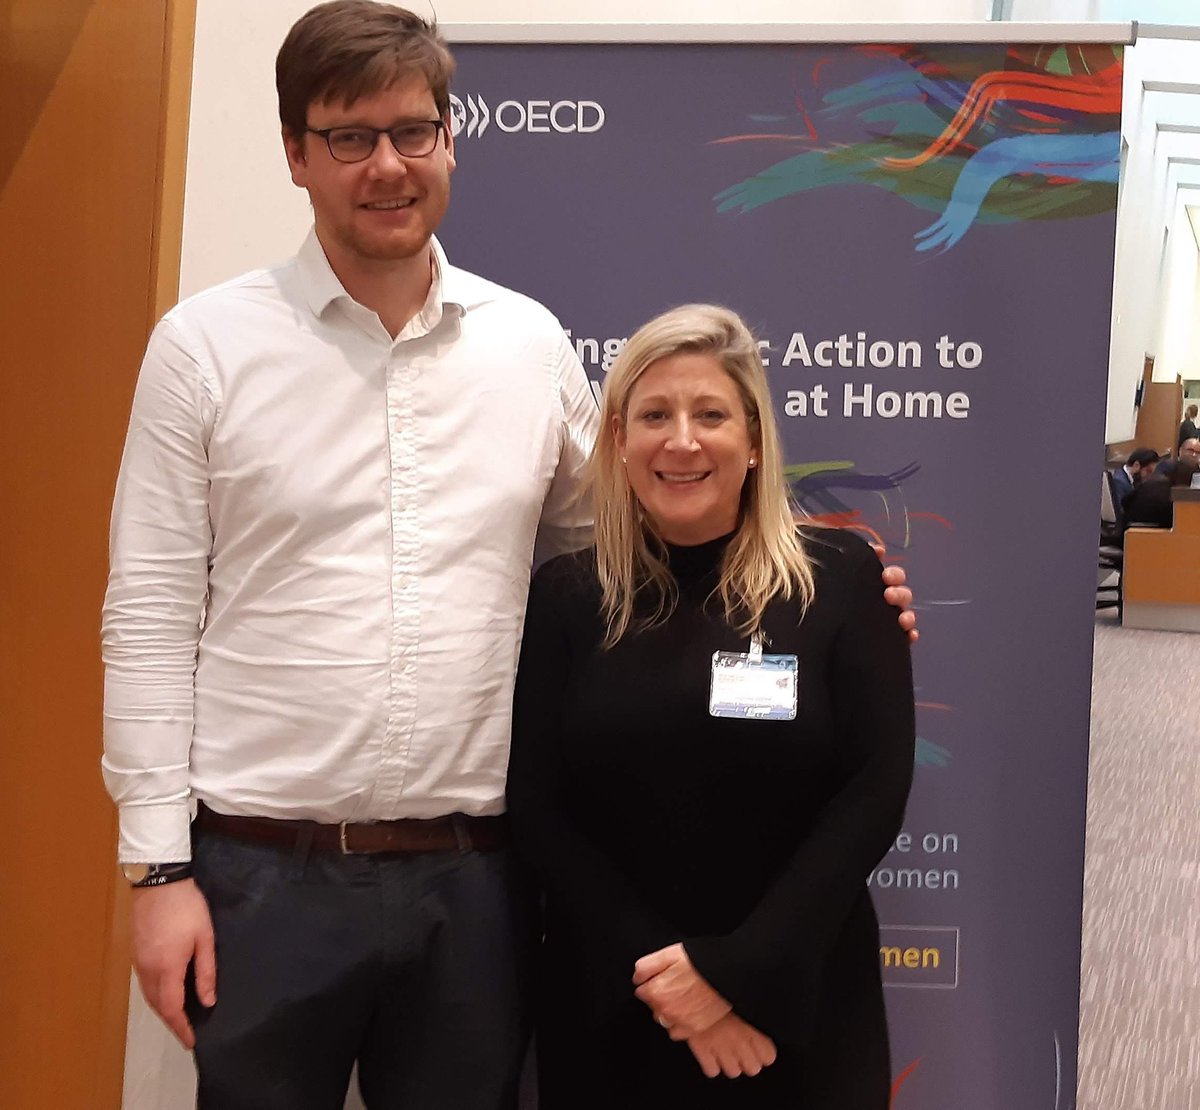 2 years ago, when we had no idea the pandemic was going to change everything, I was in Paris speaking at @OECD. This lovely fella @CoCoAwareness was speaking there too at their ending #VAWG conference.